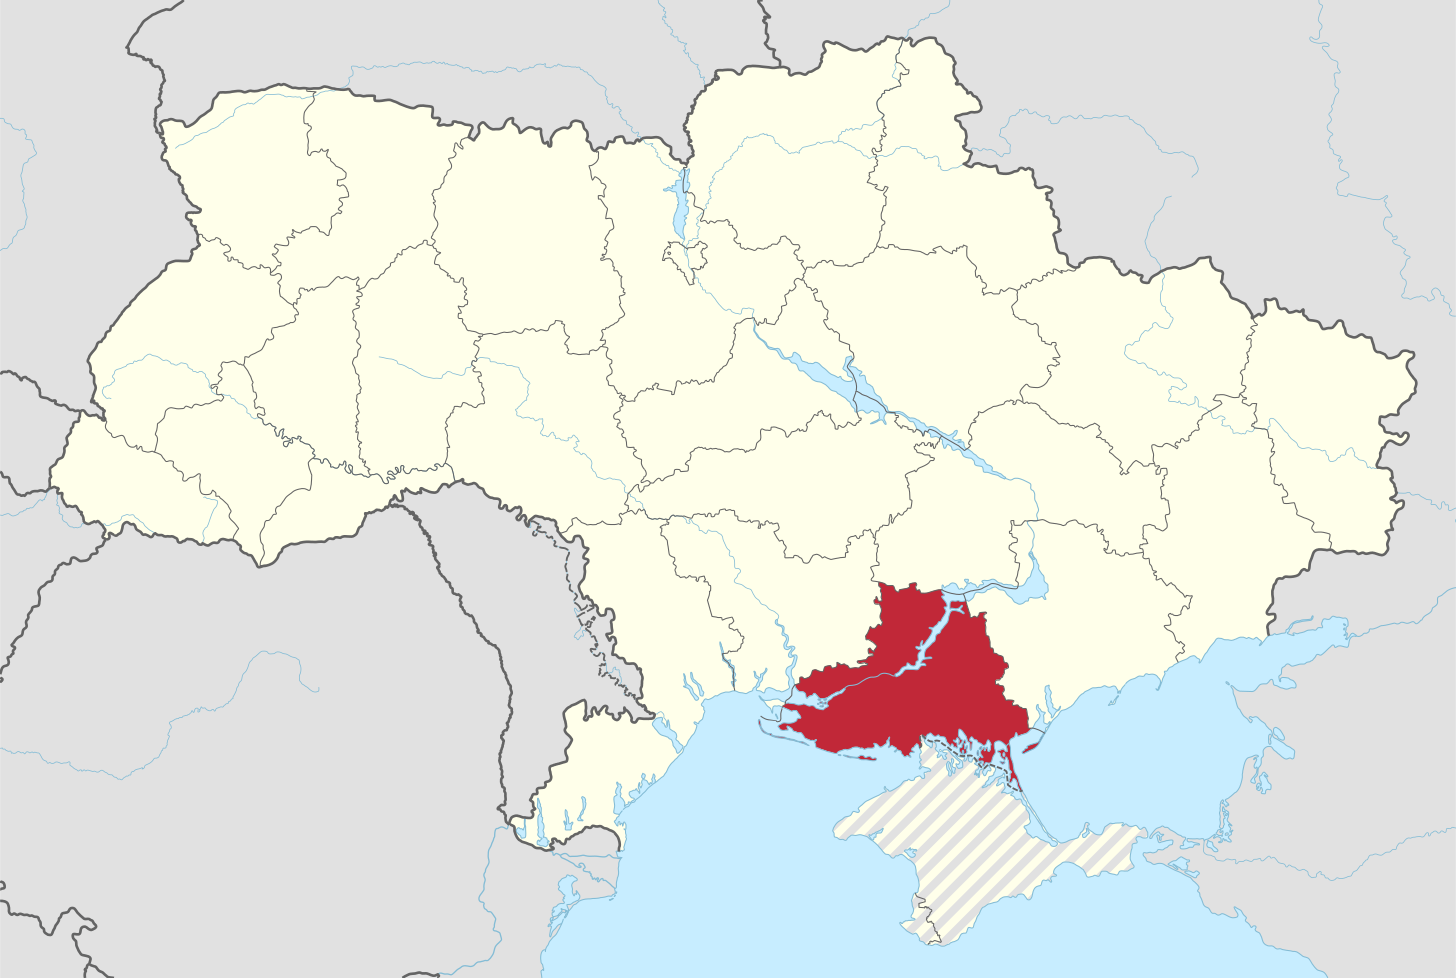 File:Kherson in Ukraine (claims hatched).svg - Wikimedia Commons